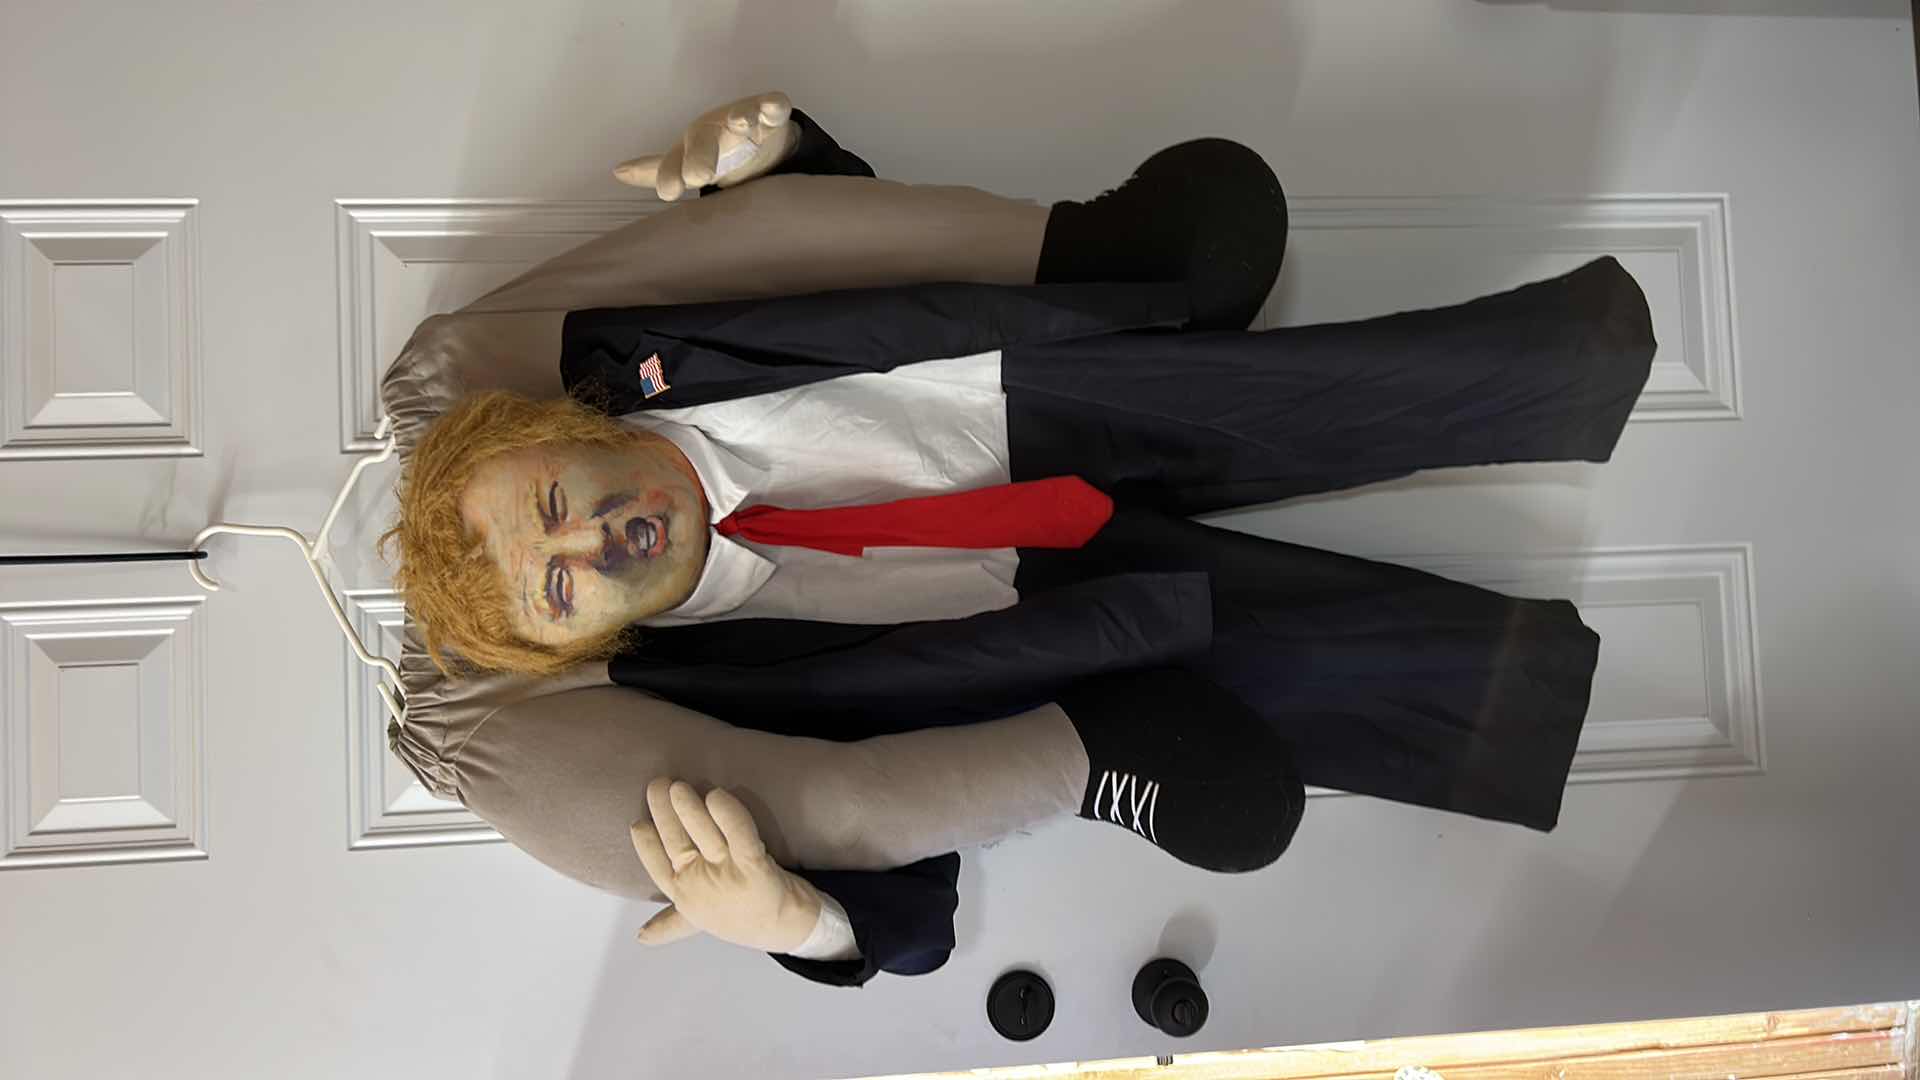 Photo 4 of ADULT TRUMP COSTUME, RIDE ON TRUMPS SHOULDERS